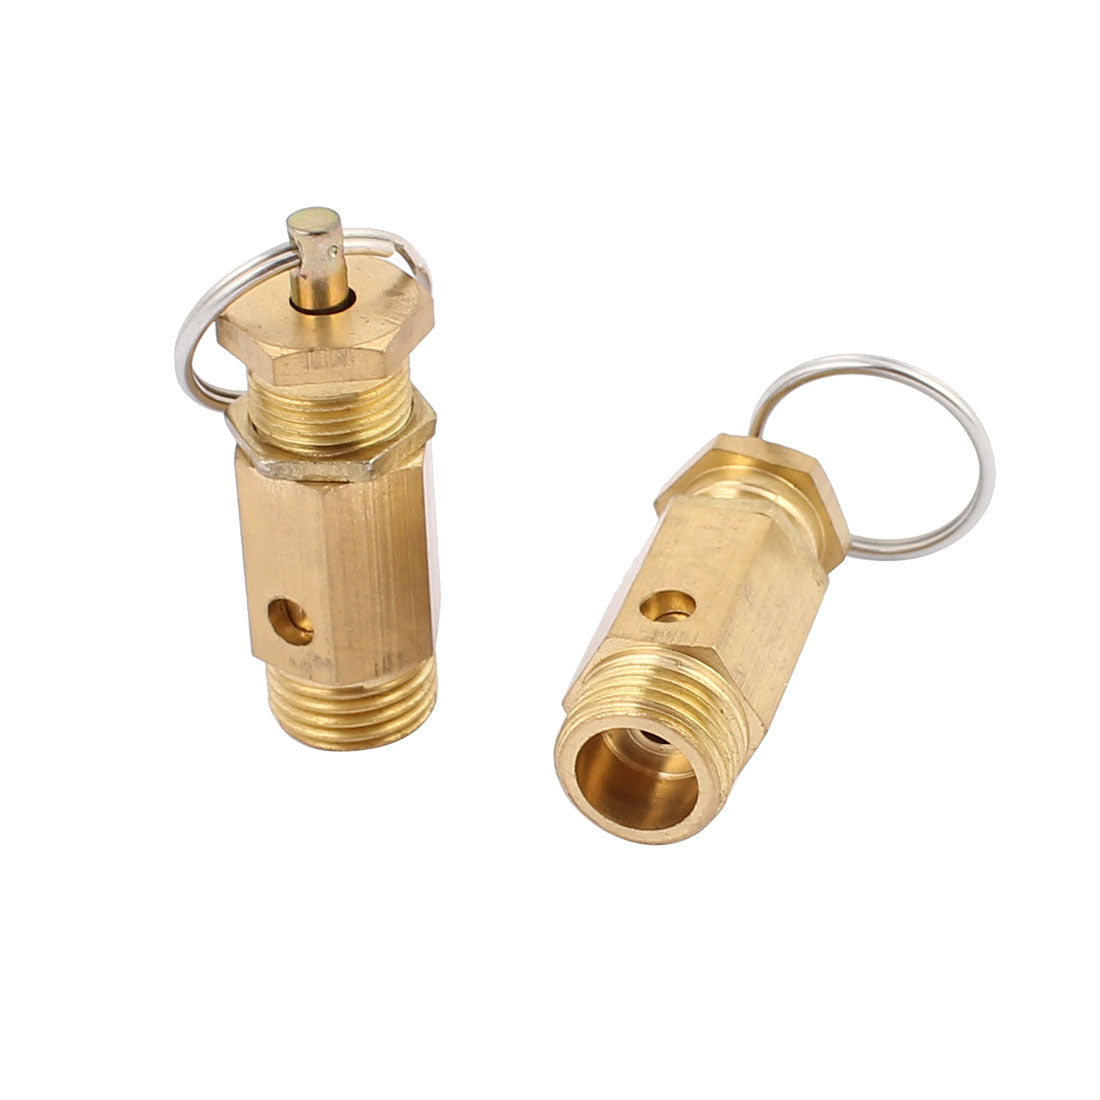 uxcell Uxcell 13mm Male Thread Dia Pneumatic Air Compressor Safety Relief Pressure Valve 2pcs